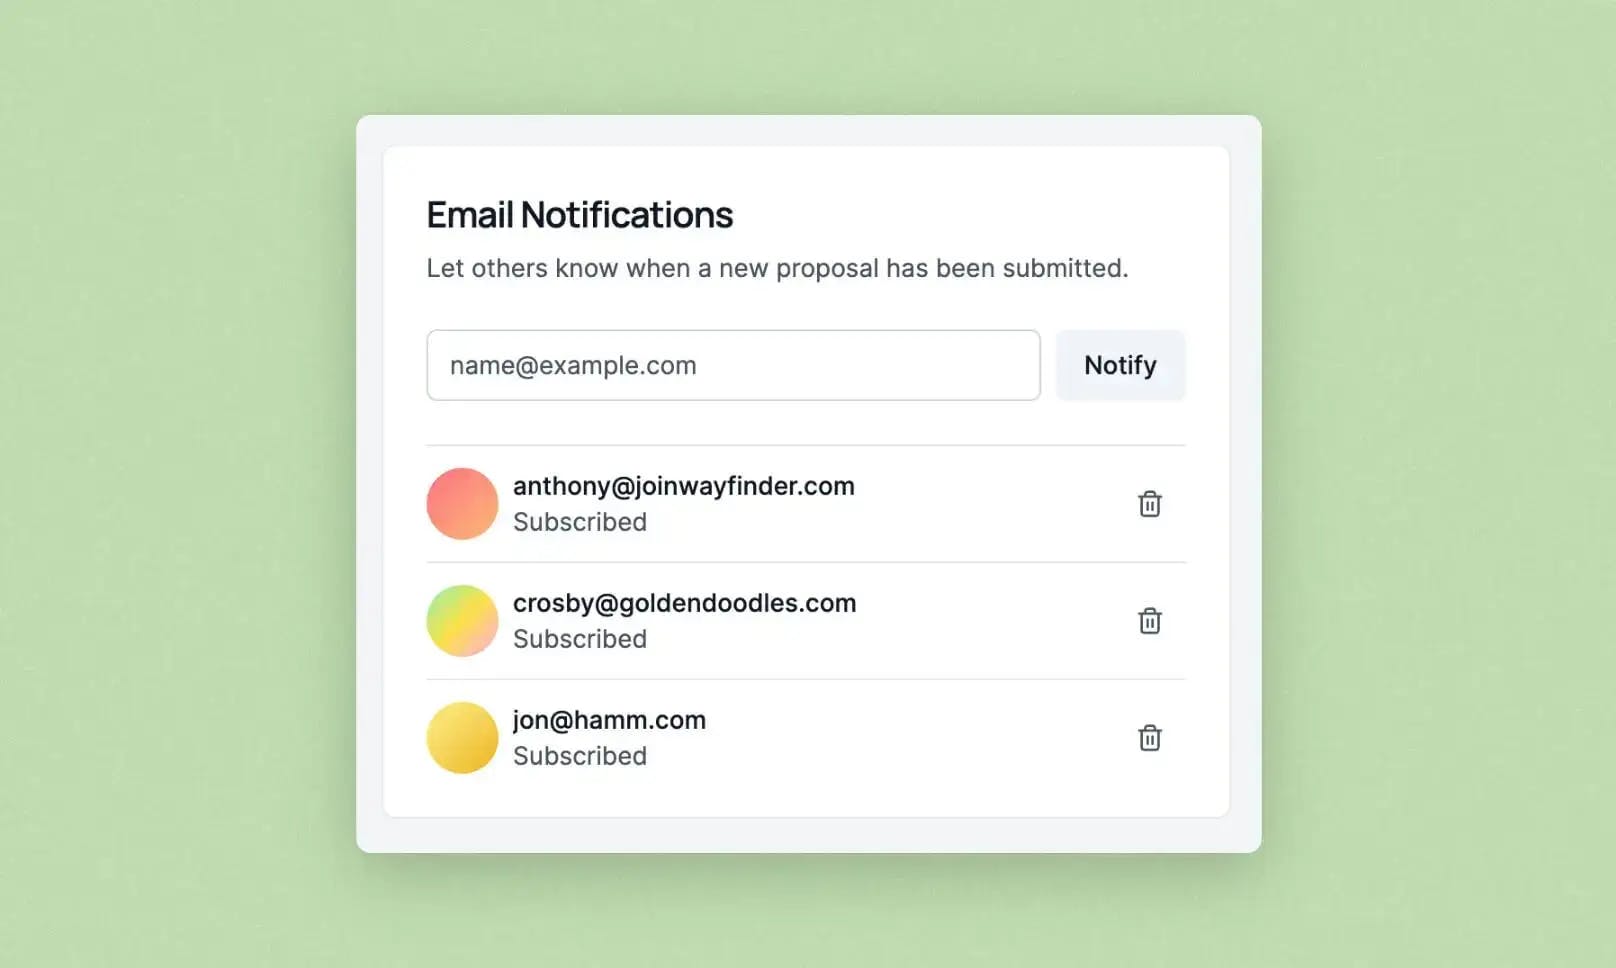 A screenshot of the email notifications module in the Wayfinder RFP dashboard.